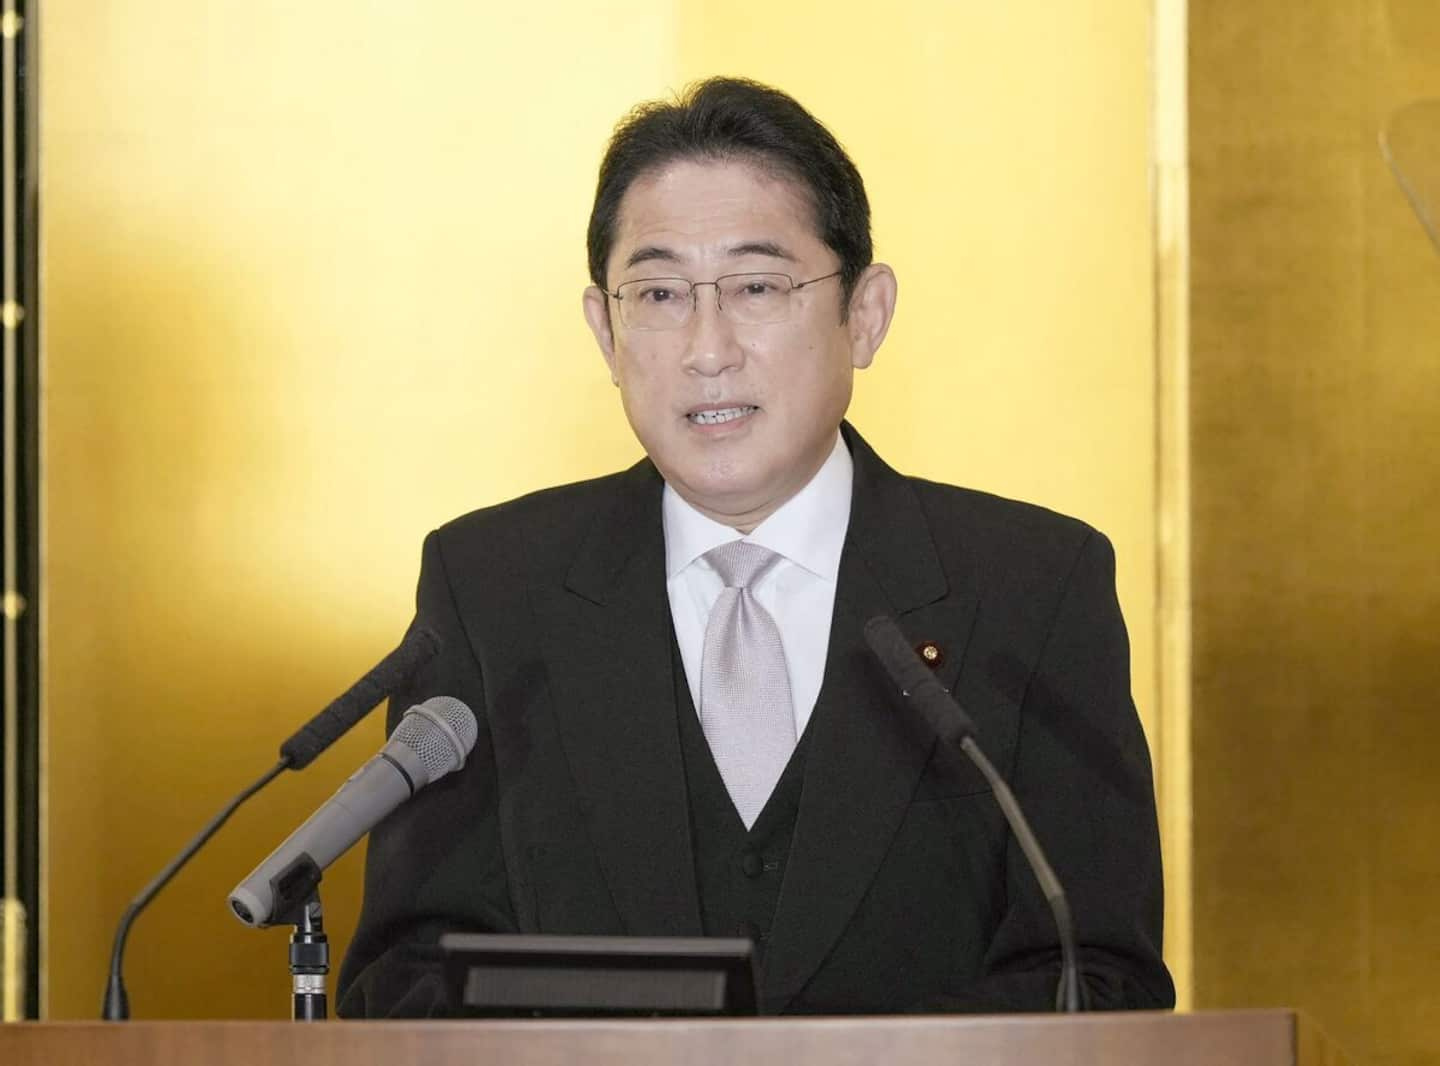 Japan's prime minister on tour with allies in Europe and North America